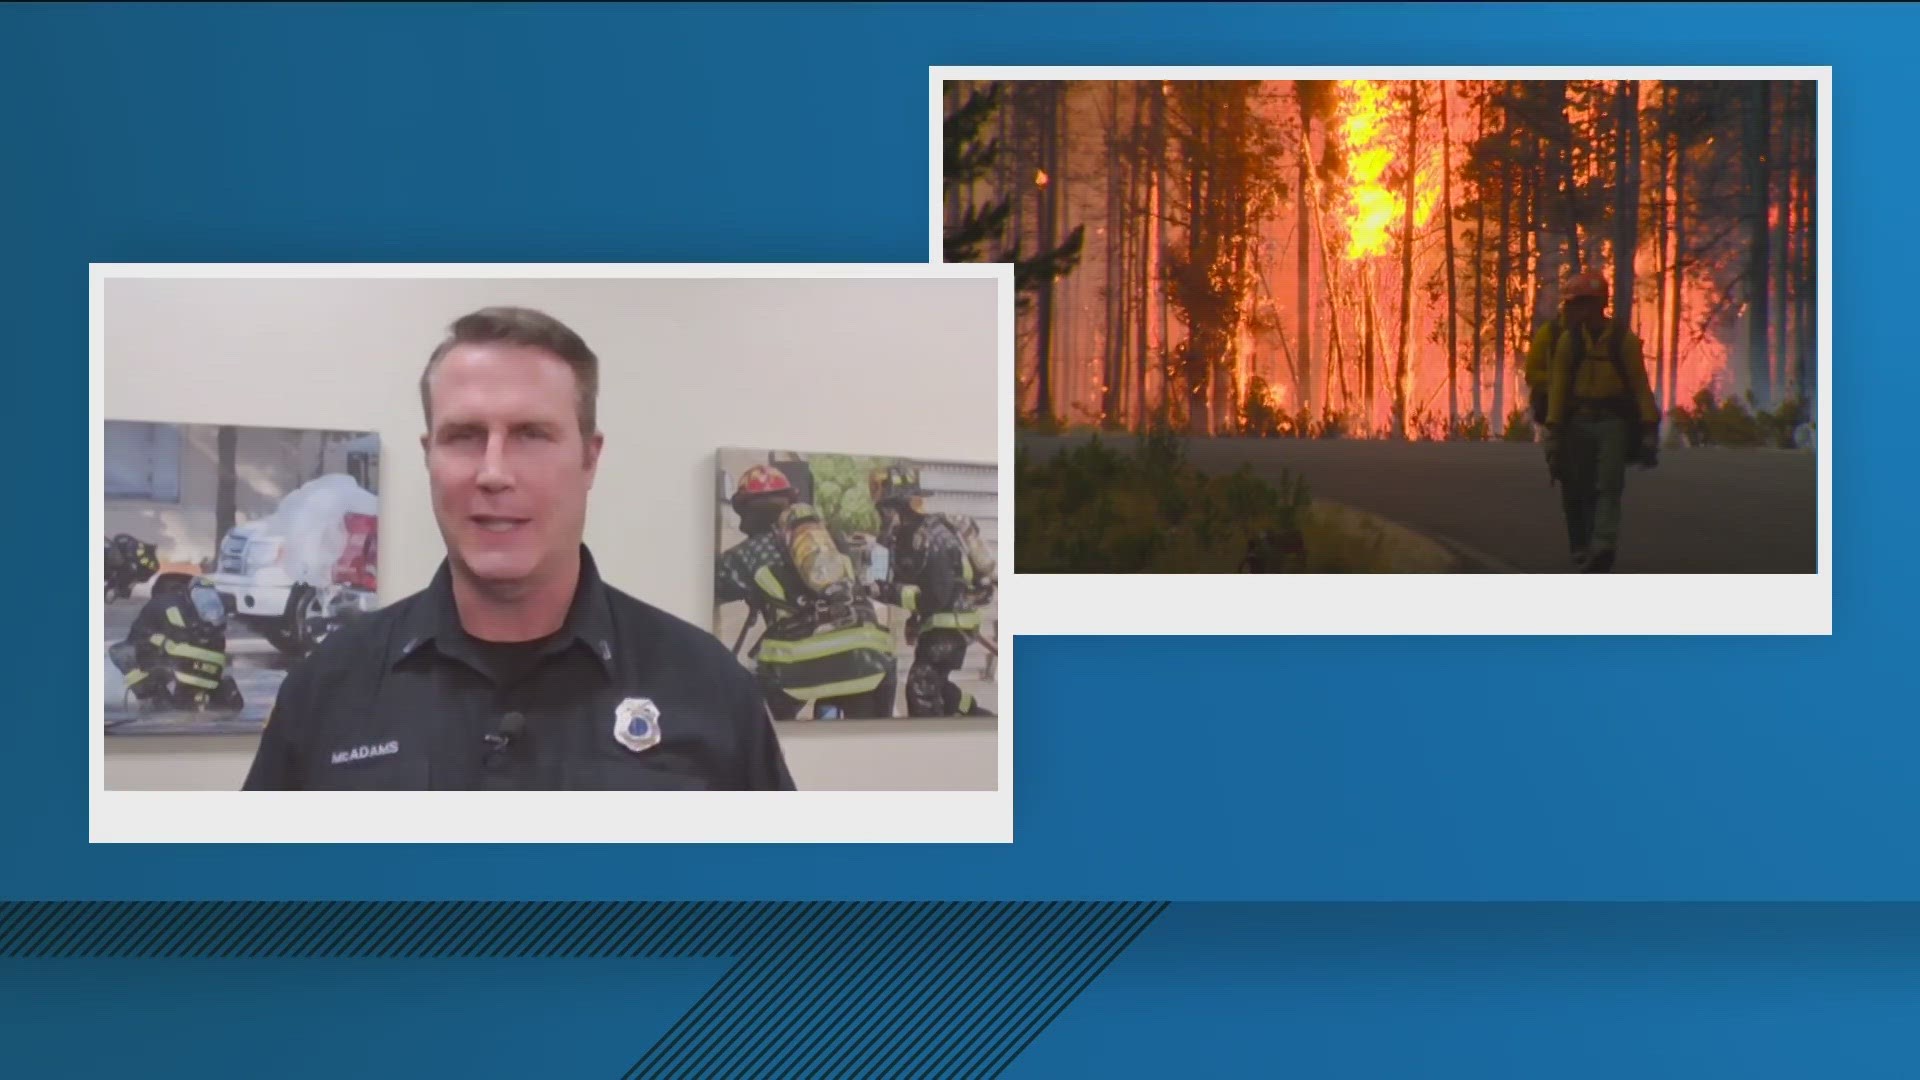 Senior Captain and Wildfire Mitigation Coordinator for the Boise Fire Department, Jerry McAdams, joins KTVB to discuss wildfire prevention and safety in Idaho.